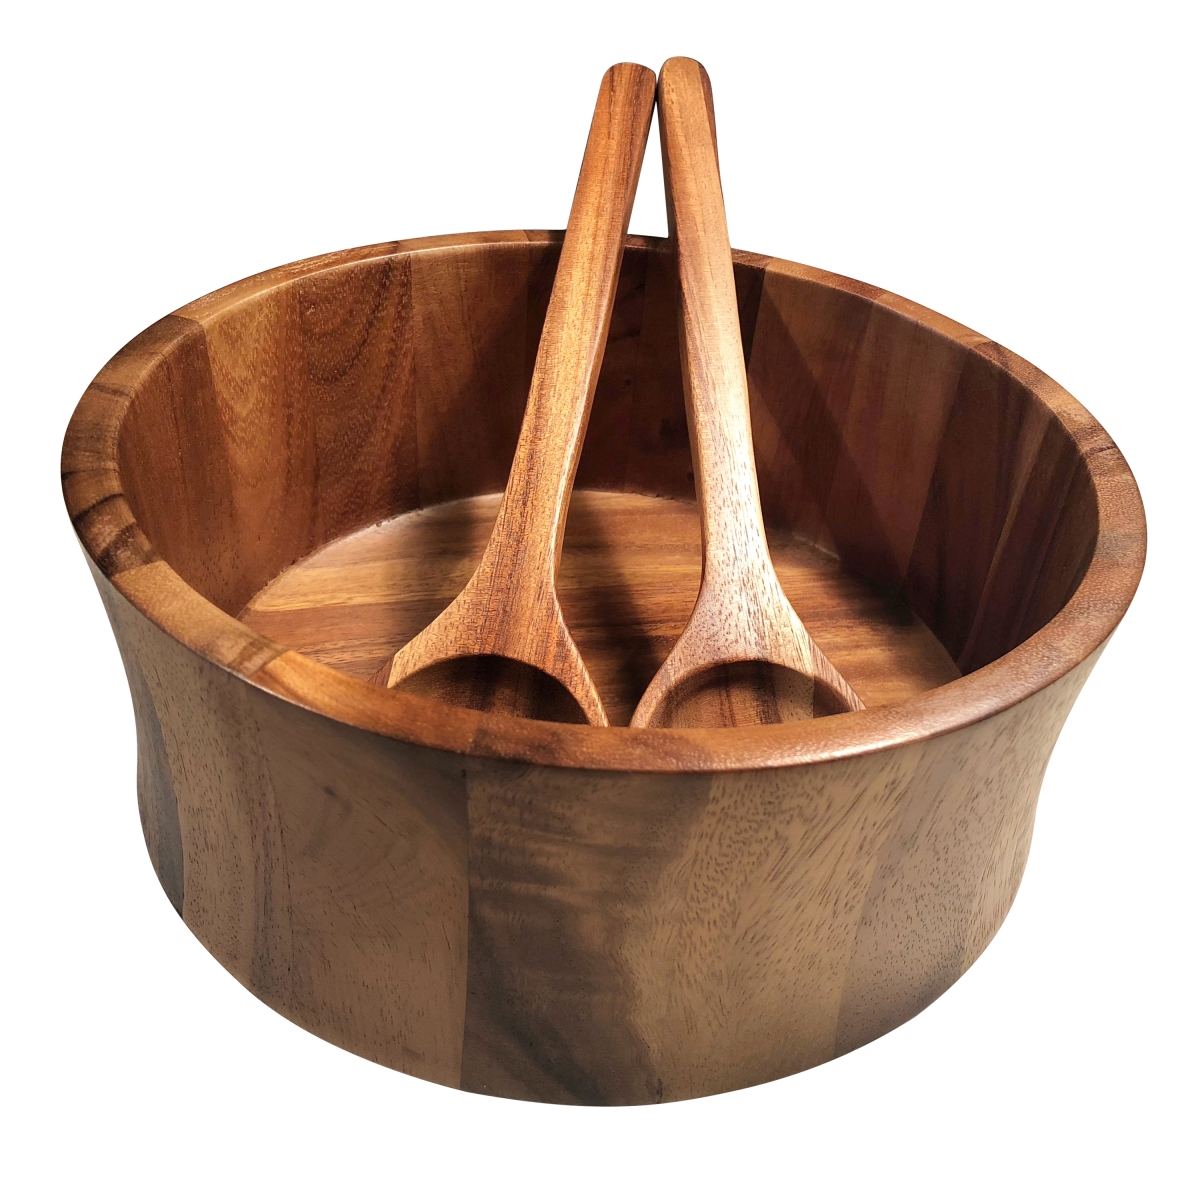 328b-3 4 In. Salad Bowl With Servers - 3 Piece